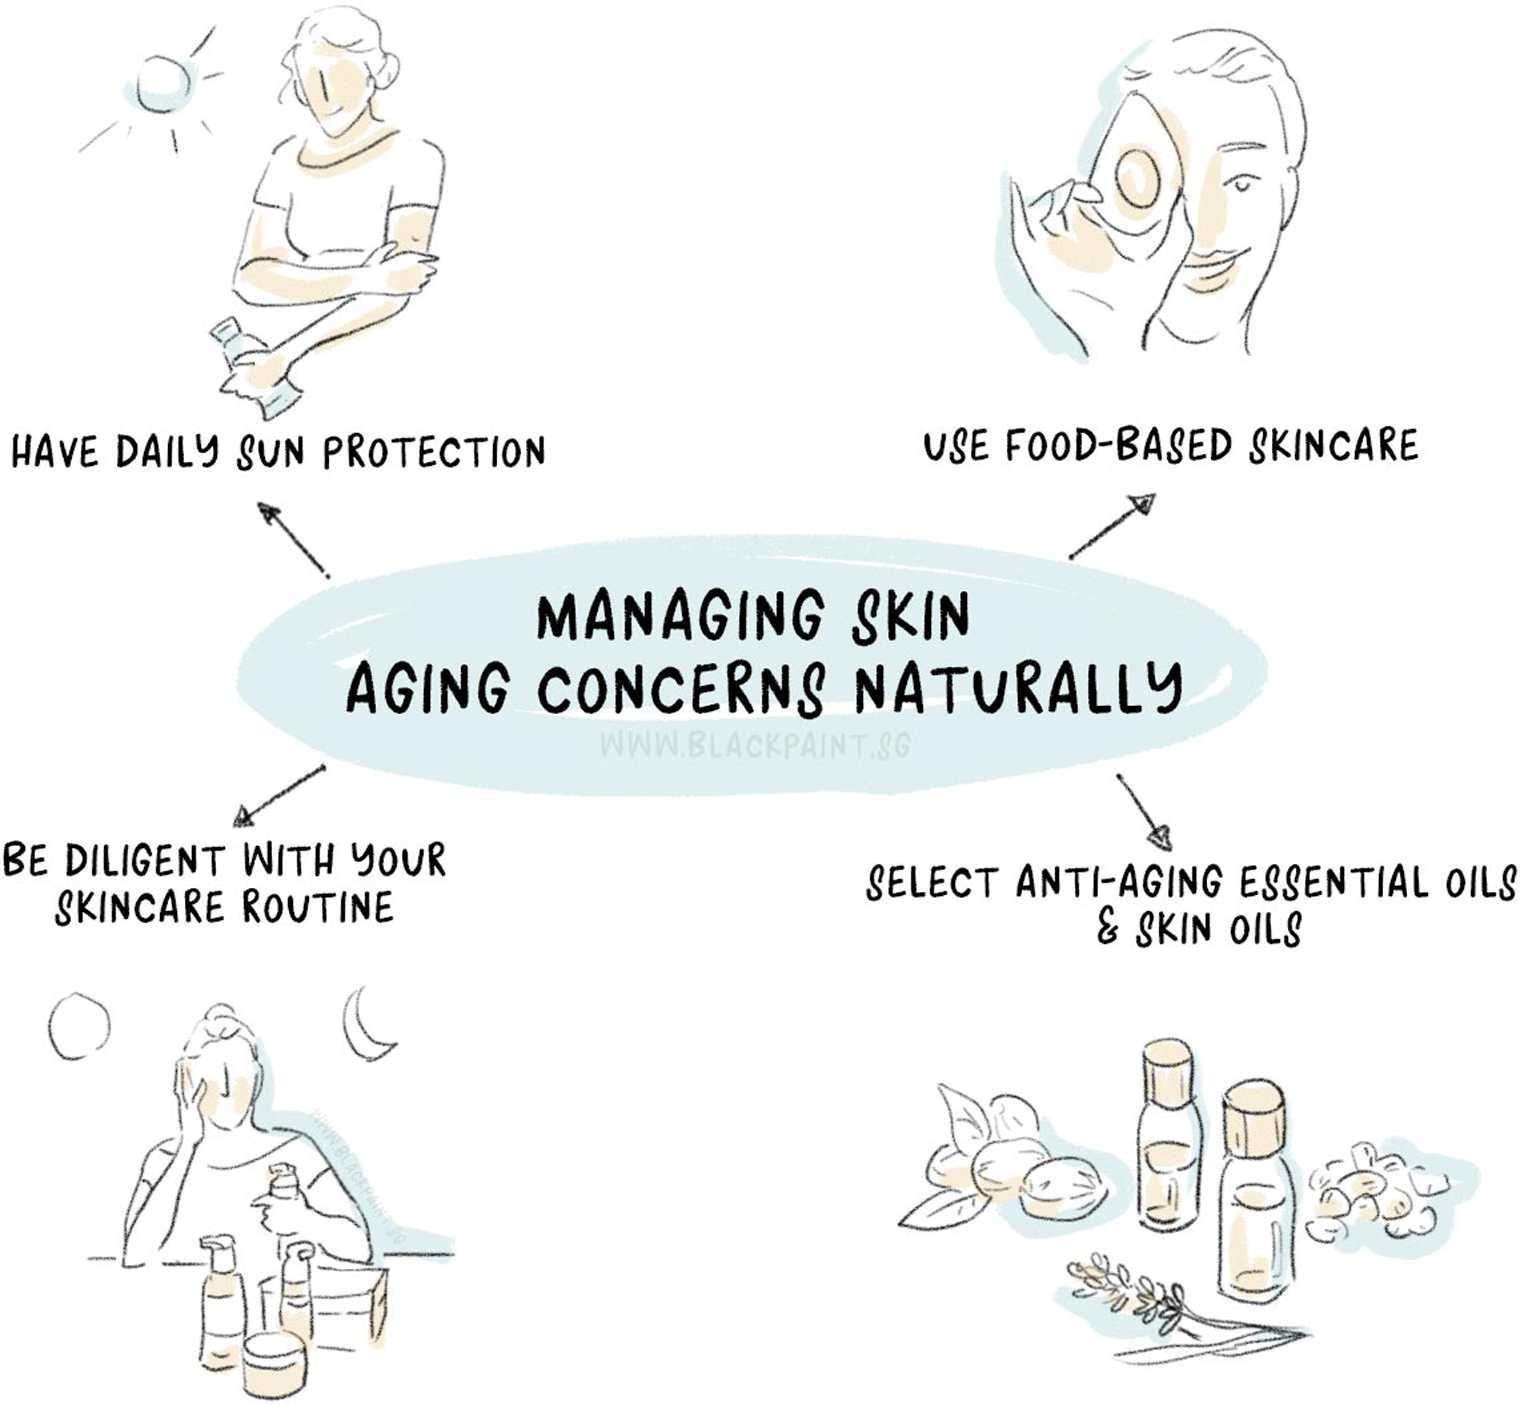 illustration of skin aging concerns can be managed through natural means.